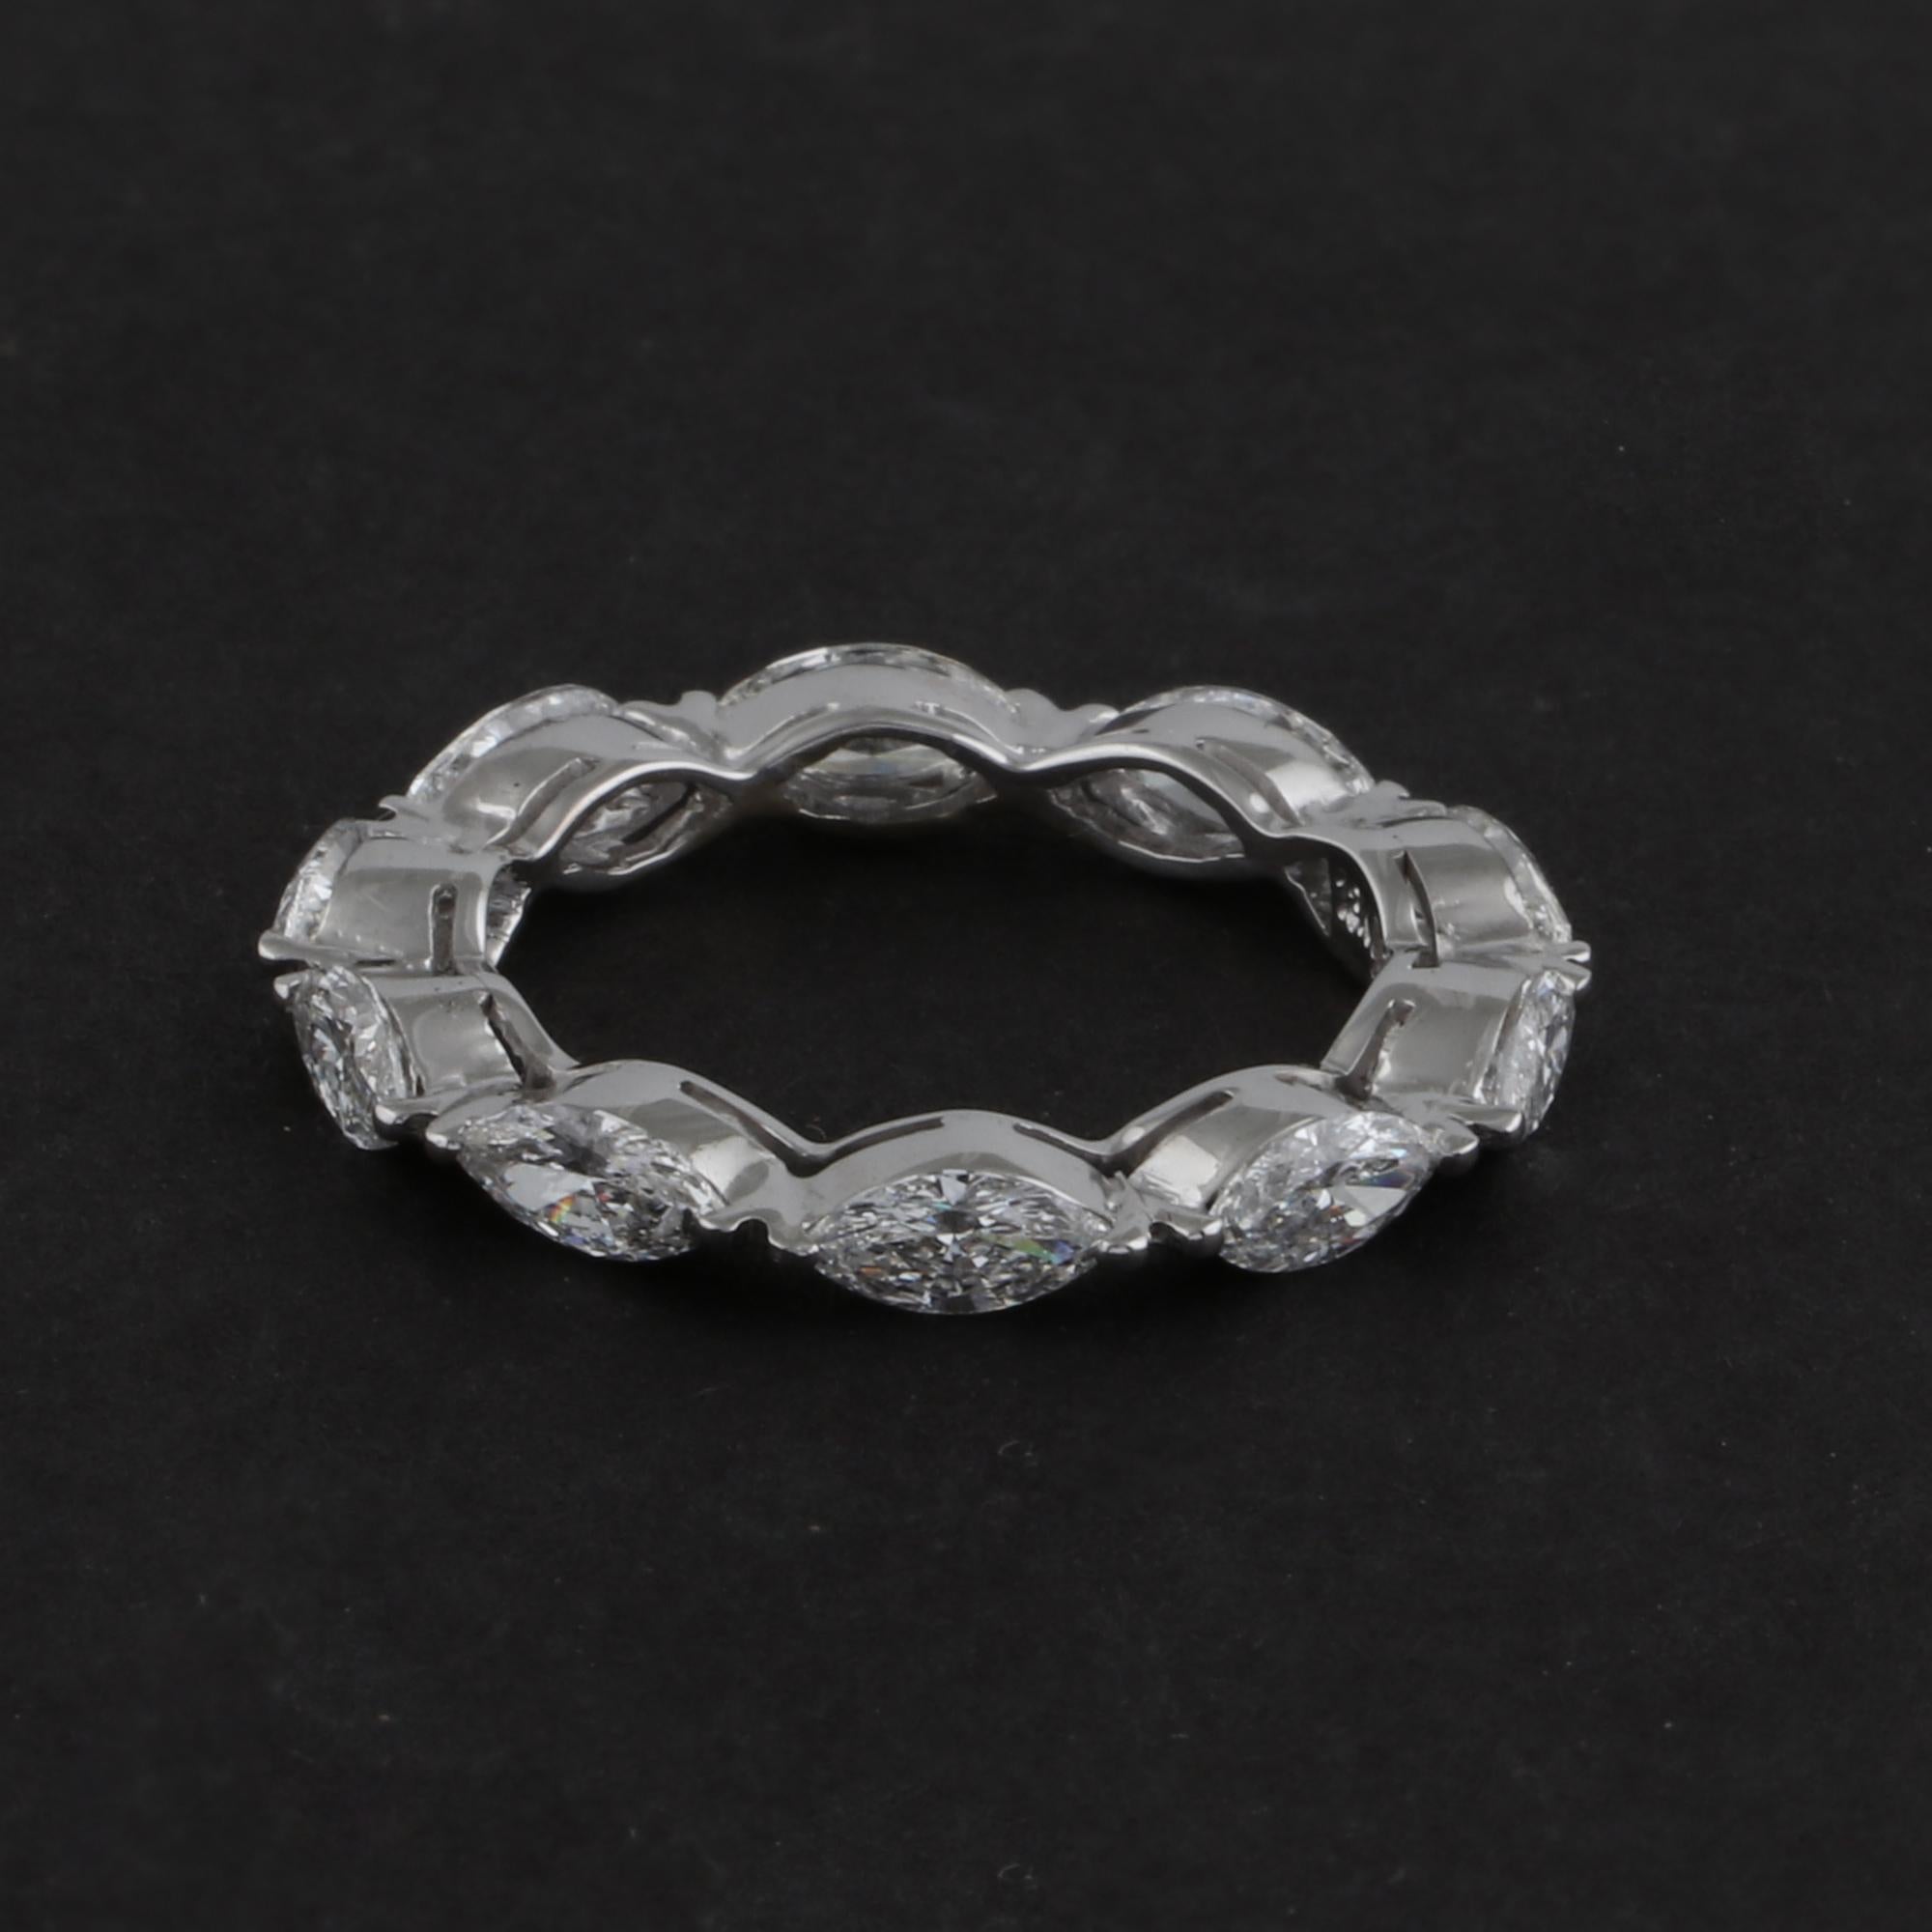 For Sale:  1.9 Carat SI Clarity HI Color Marquise Diamond Eternity Band Ring 18k White Gold 4